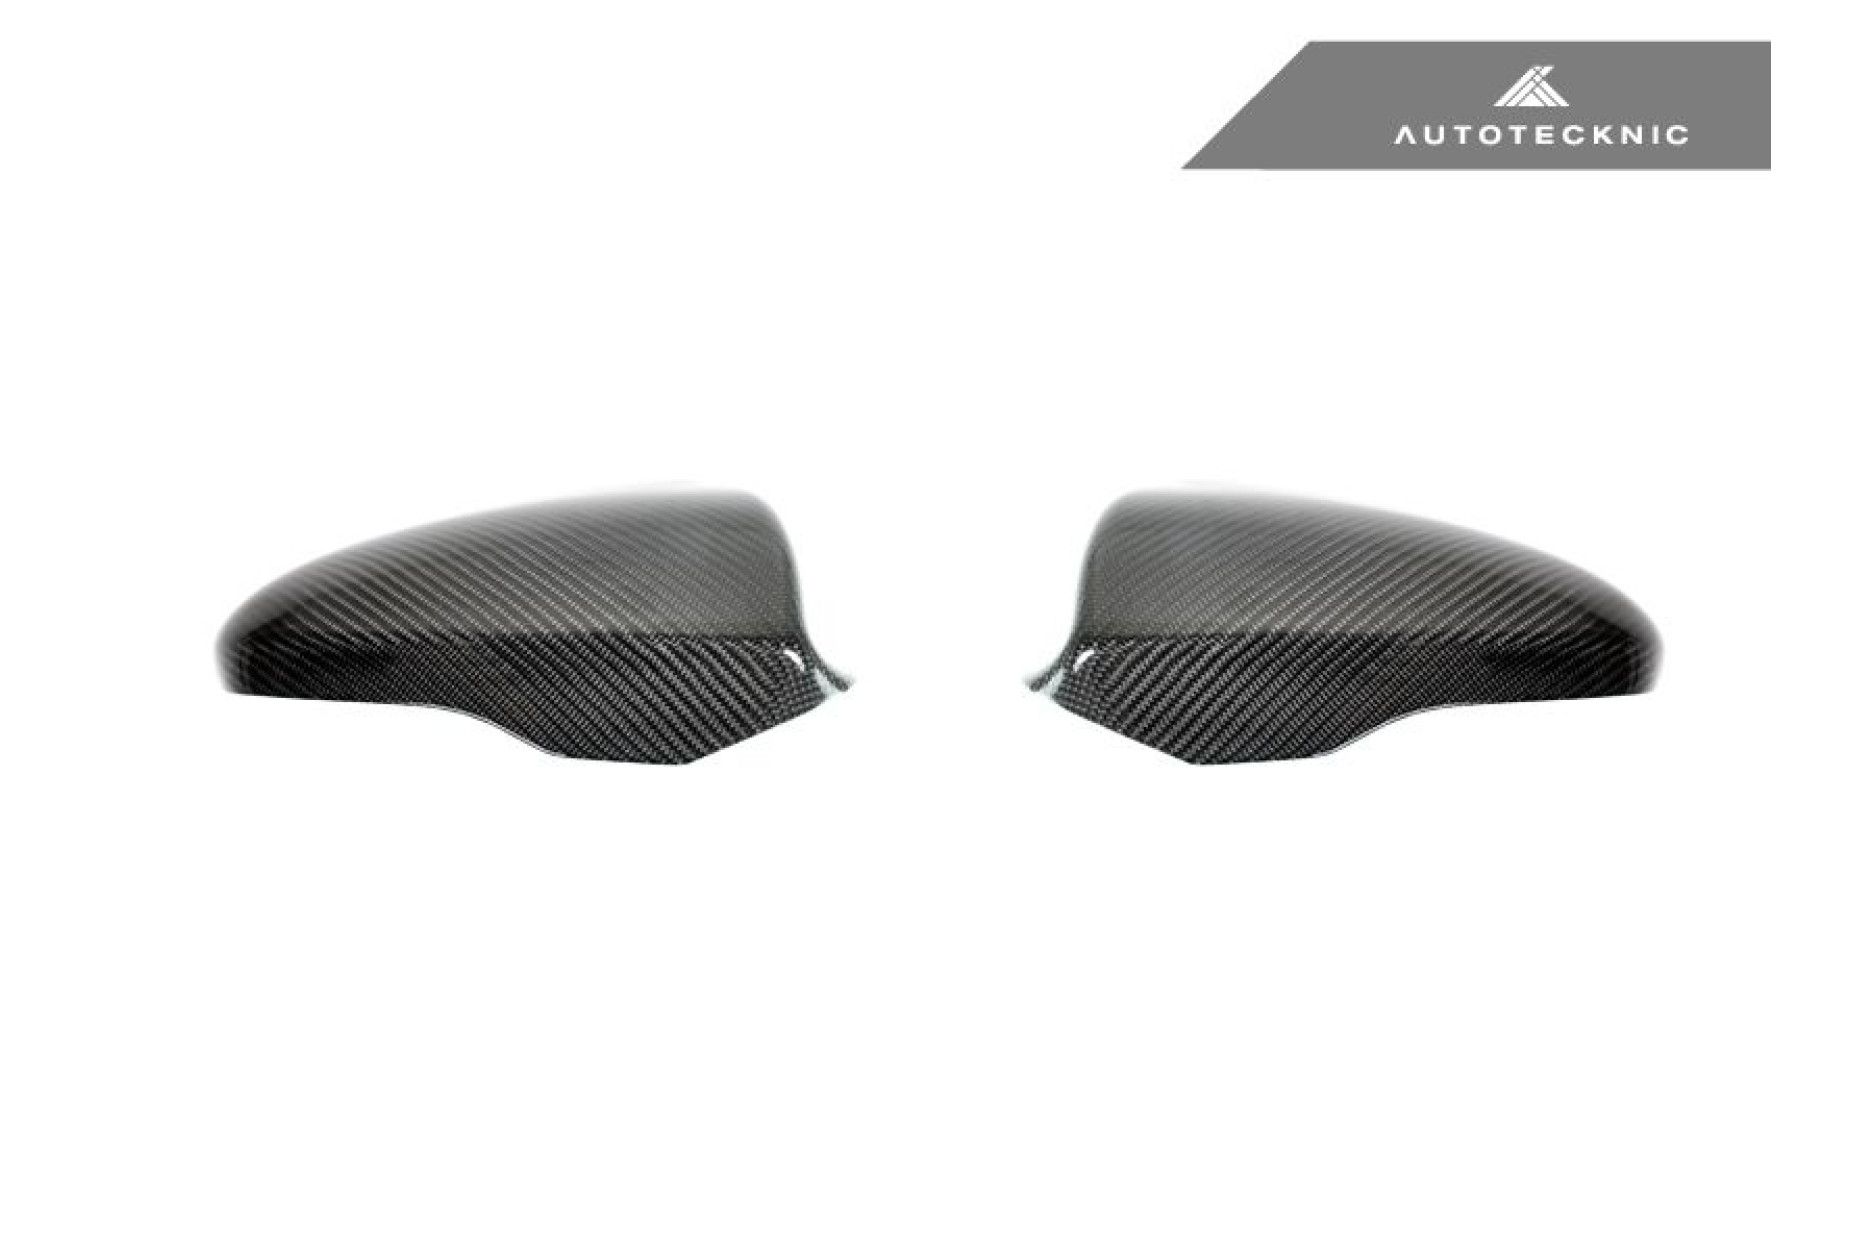 AutoTecknic Carbon Fiber Replacement Mirror Covers - F10 M5/ F12 M6 (2) 